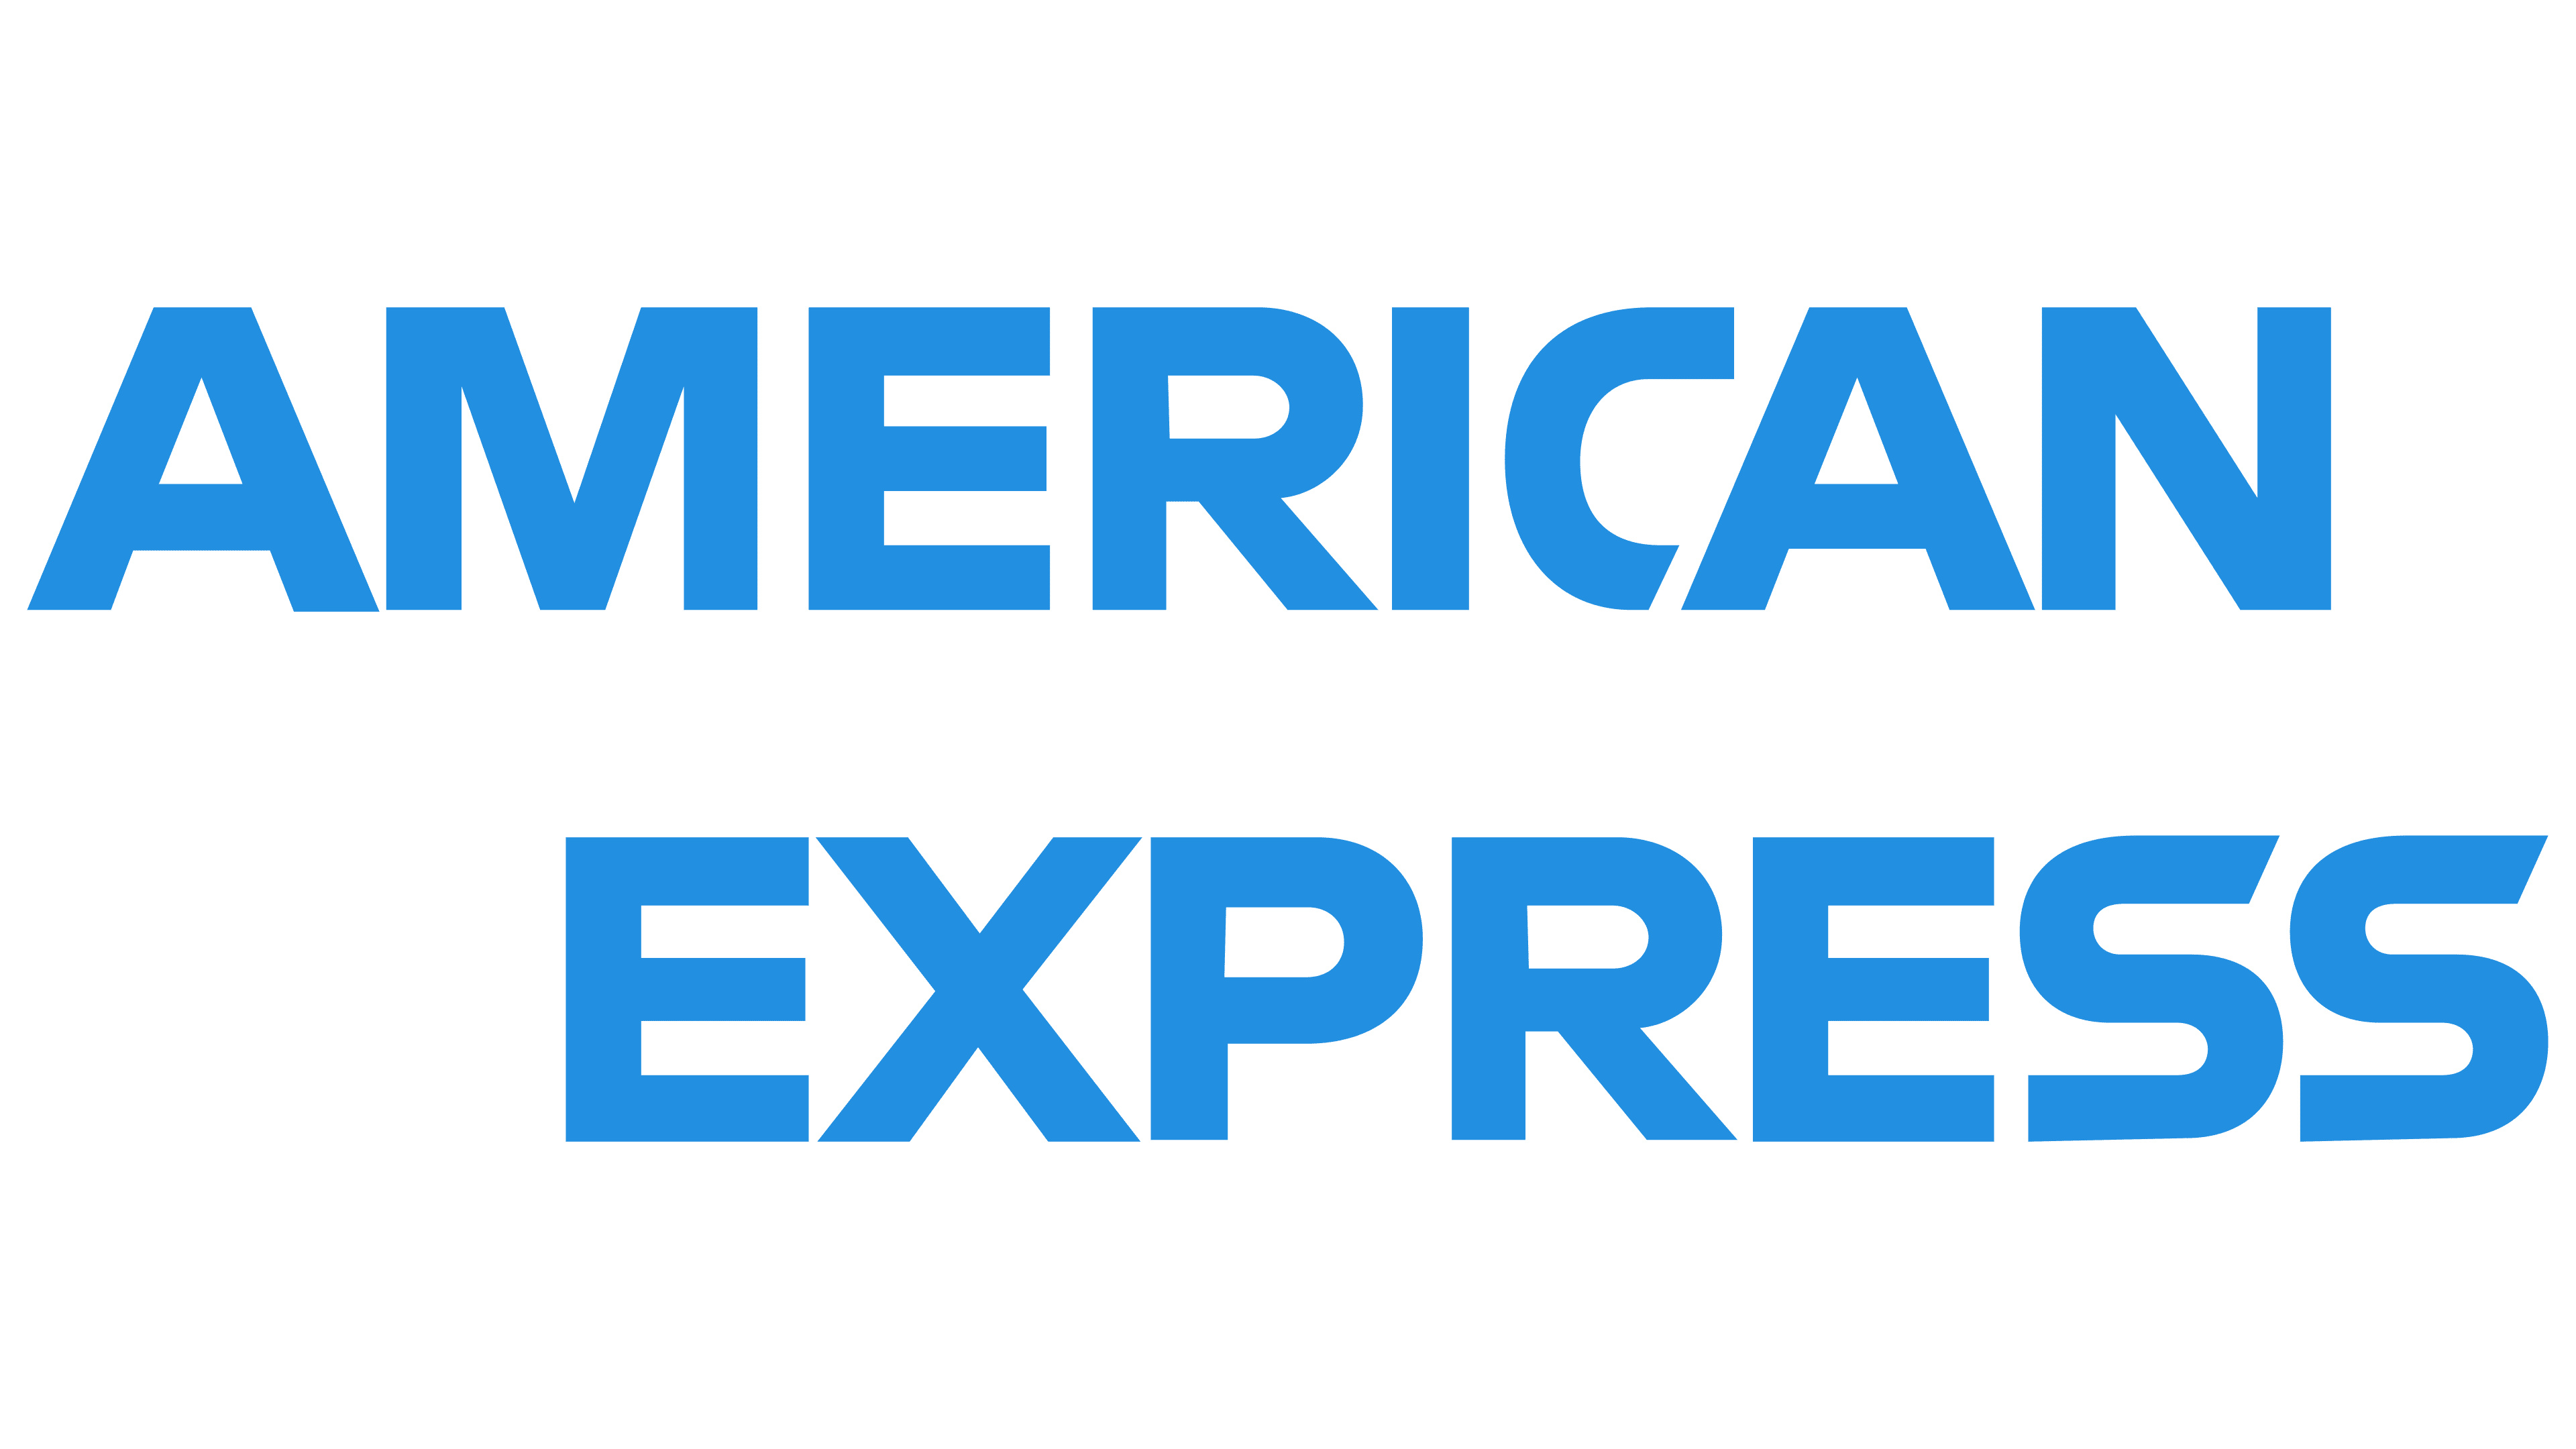 American Express: An American multinational corporation specialized in payment card services. 3840x2160 4K Background.